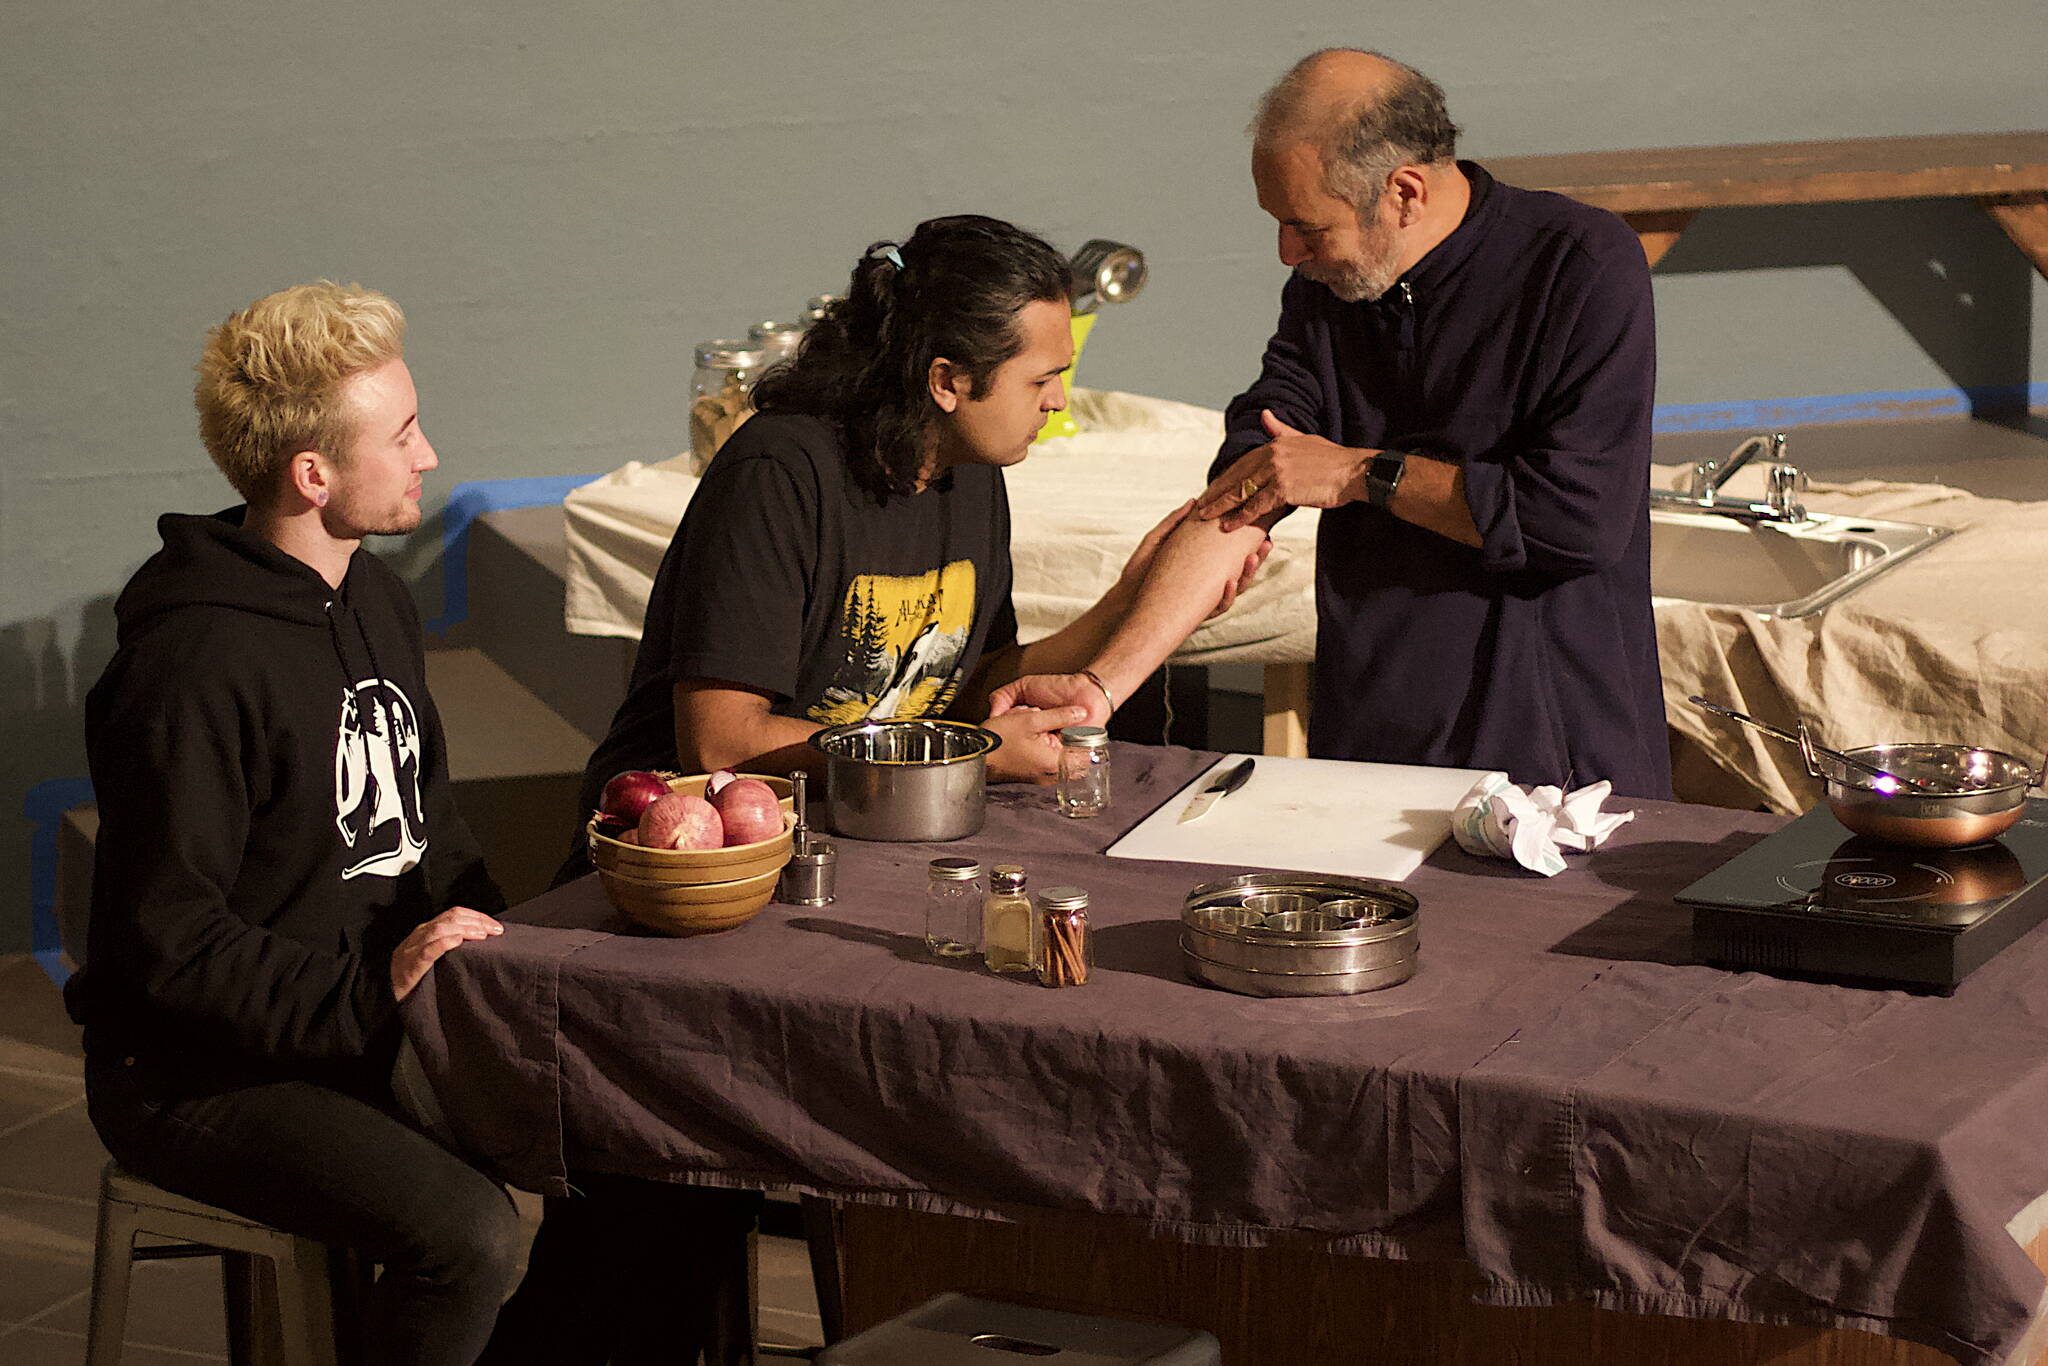 Jack Scholz, left, Tristan Cameron, center, and Dilip Ratnam discuss cultural upbringings in a rehearsal scene of “A Nice Indian Boy” at Perseverance Theatre on Tuesday night. The production is scheduled for the theater’s main stage from Dec. 1-17, with video on demand available Dec. 13-Jan. 22. (Mark Sabbatini / Juneau Empire)